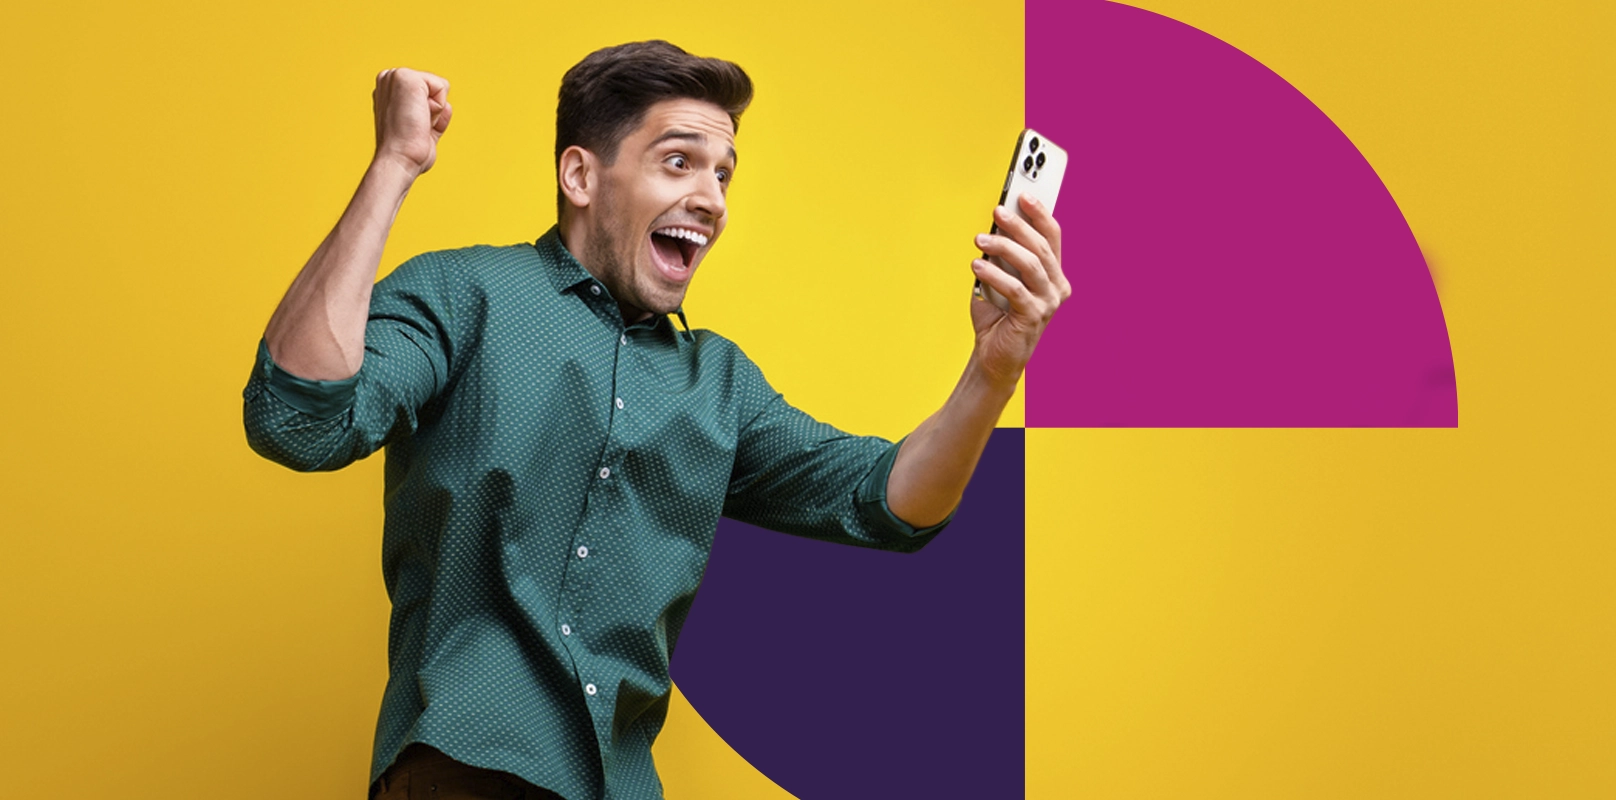 A man holding a cell phone and cheering, standing against a yellow background with Saven Financial's quarter cirlces.